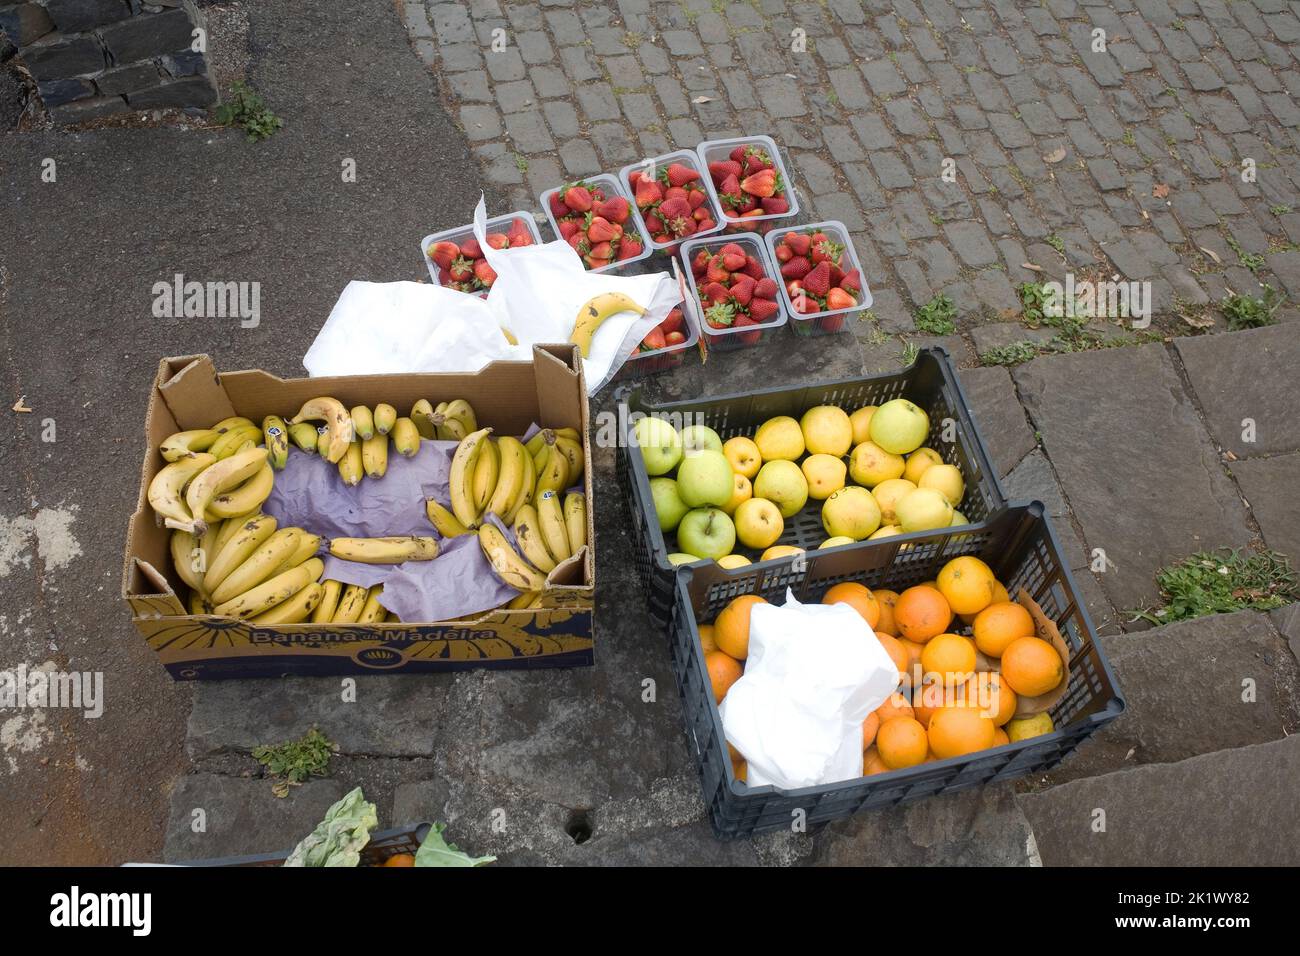 selection of fruit: bananas, oranges, apples and strawberries, for sale at roadside near Boaventura in Northern Madeira Stock Photo